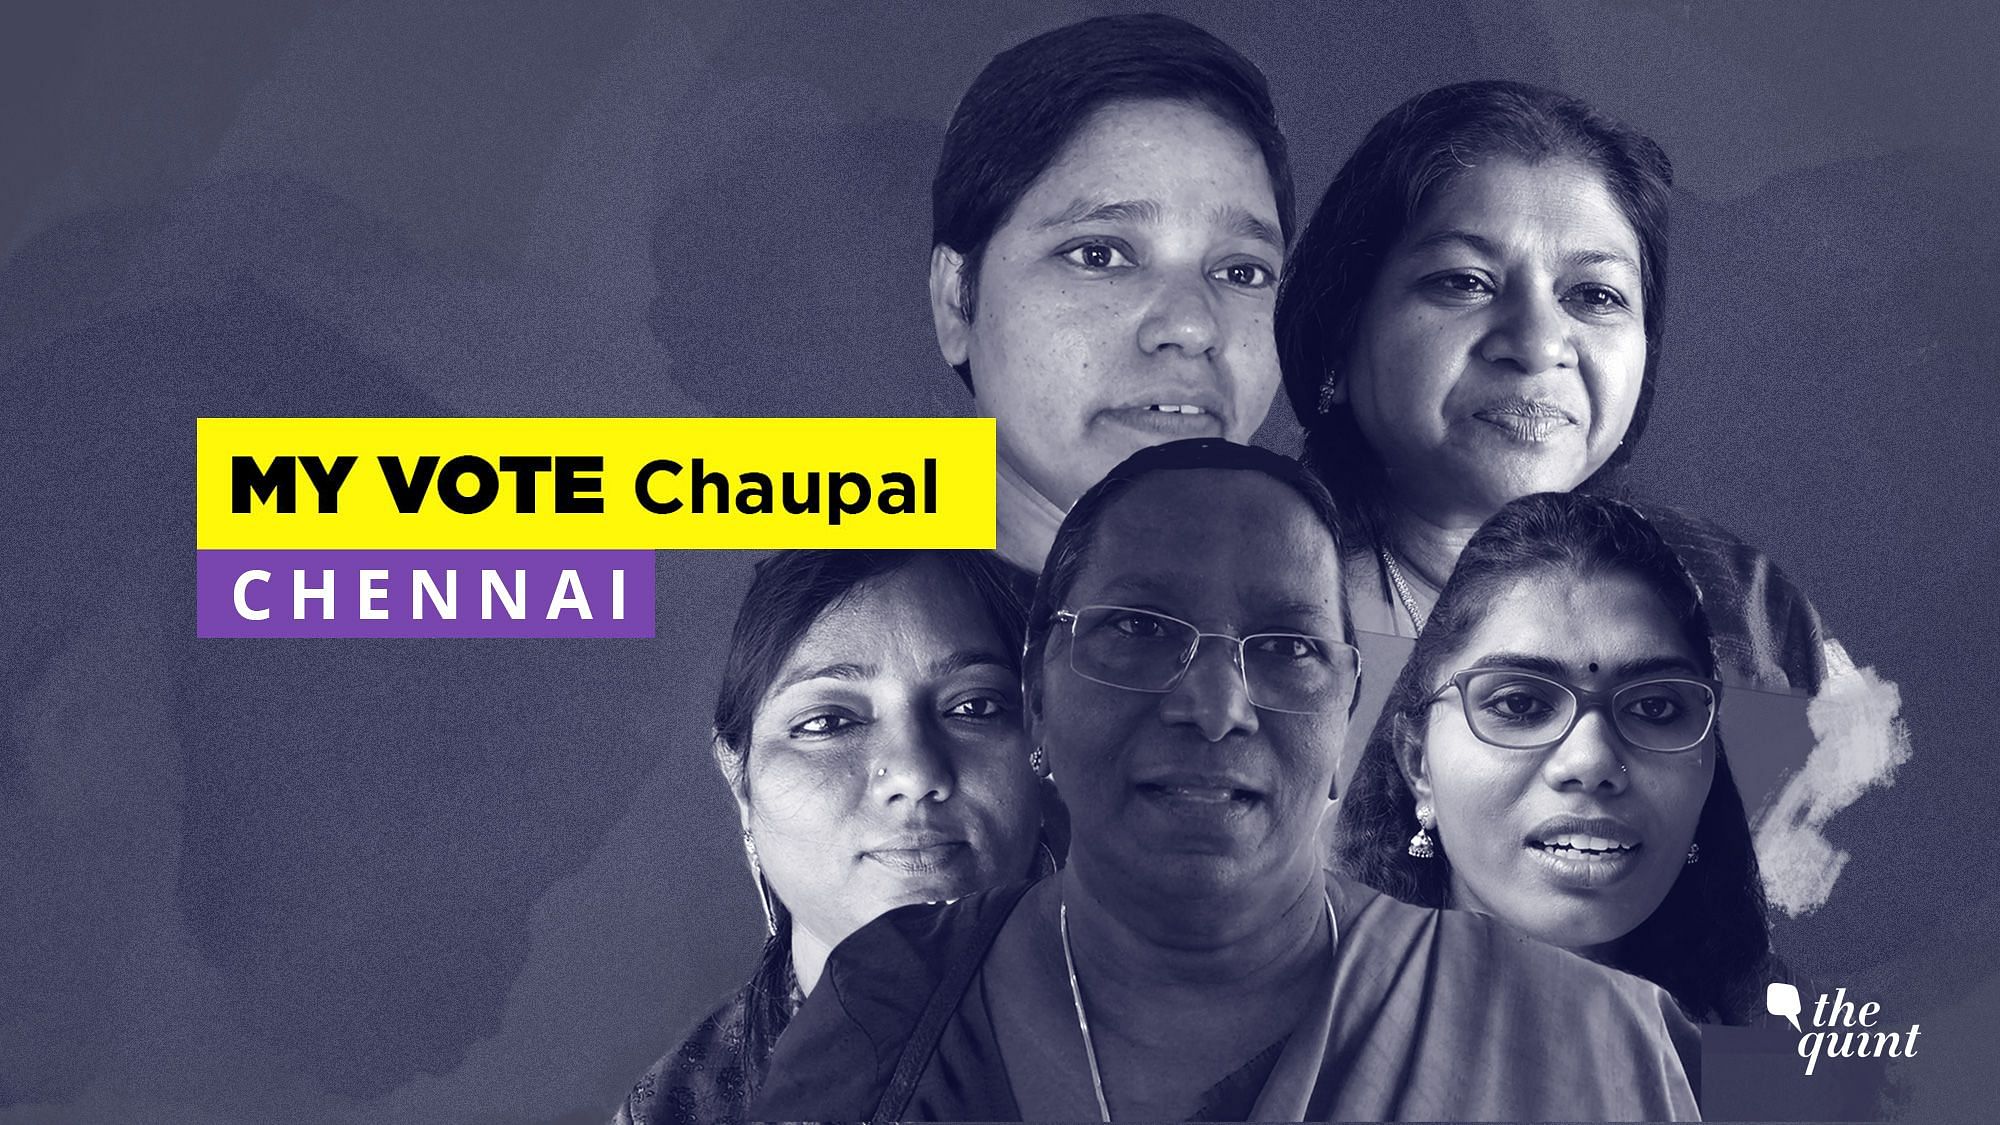 A group of Dalit women leaders and activists came together to discuss not just gender, but political power, multiple levels of oppression and their expectations from 2019 Lok Sabha polls.